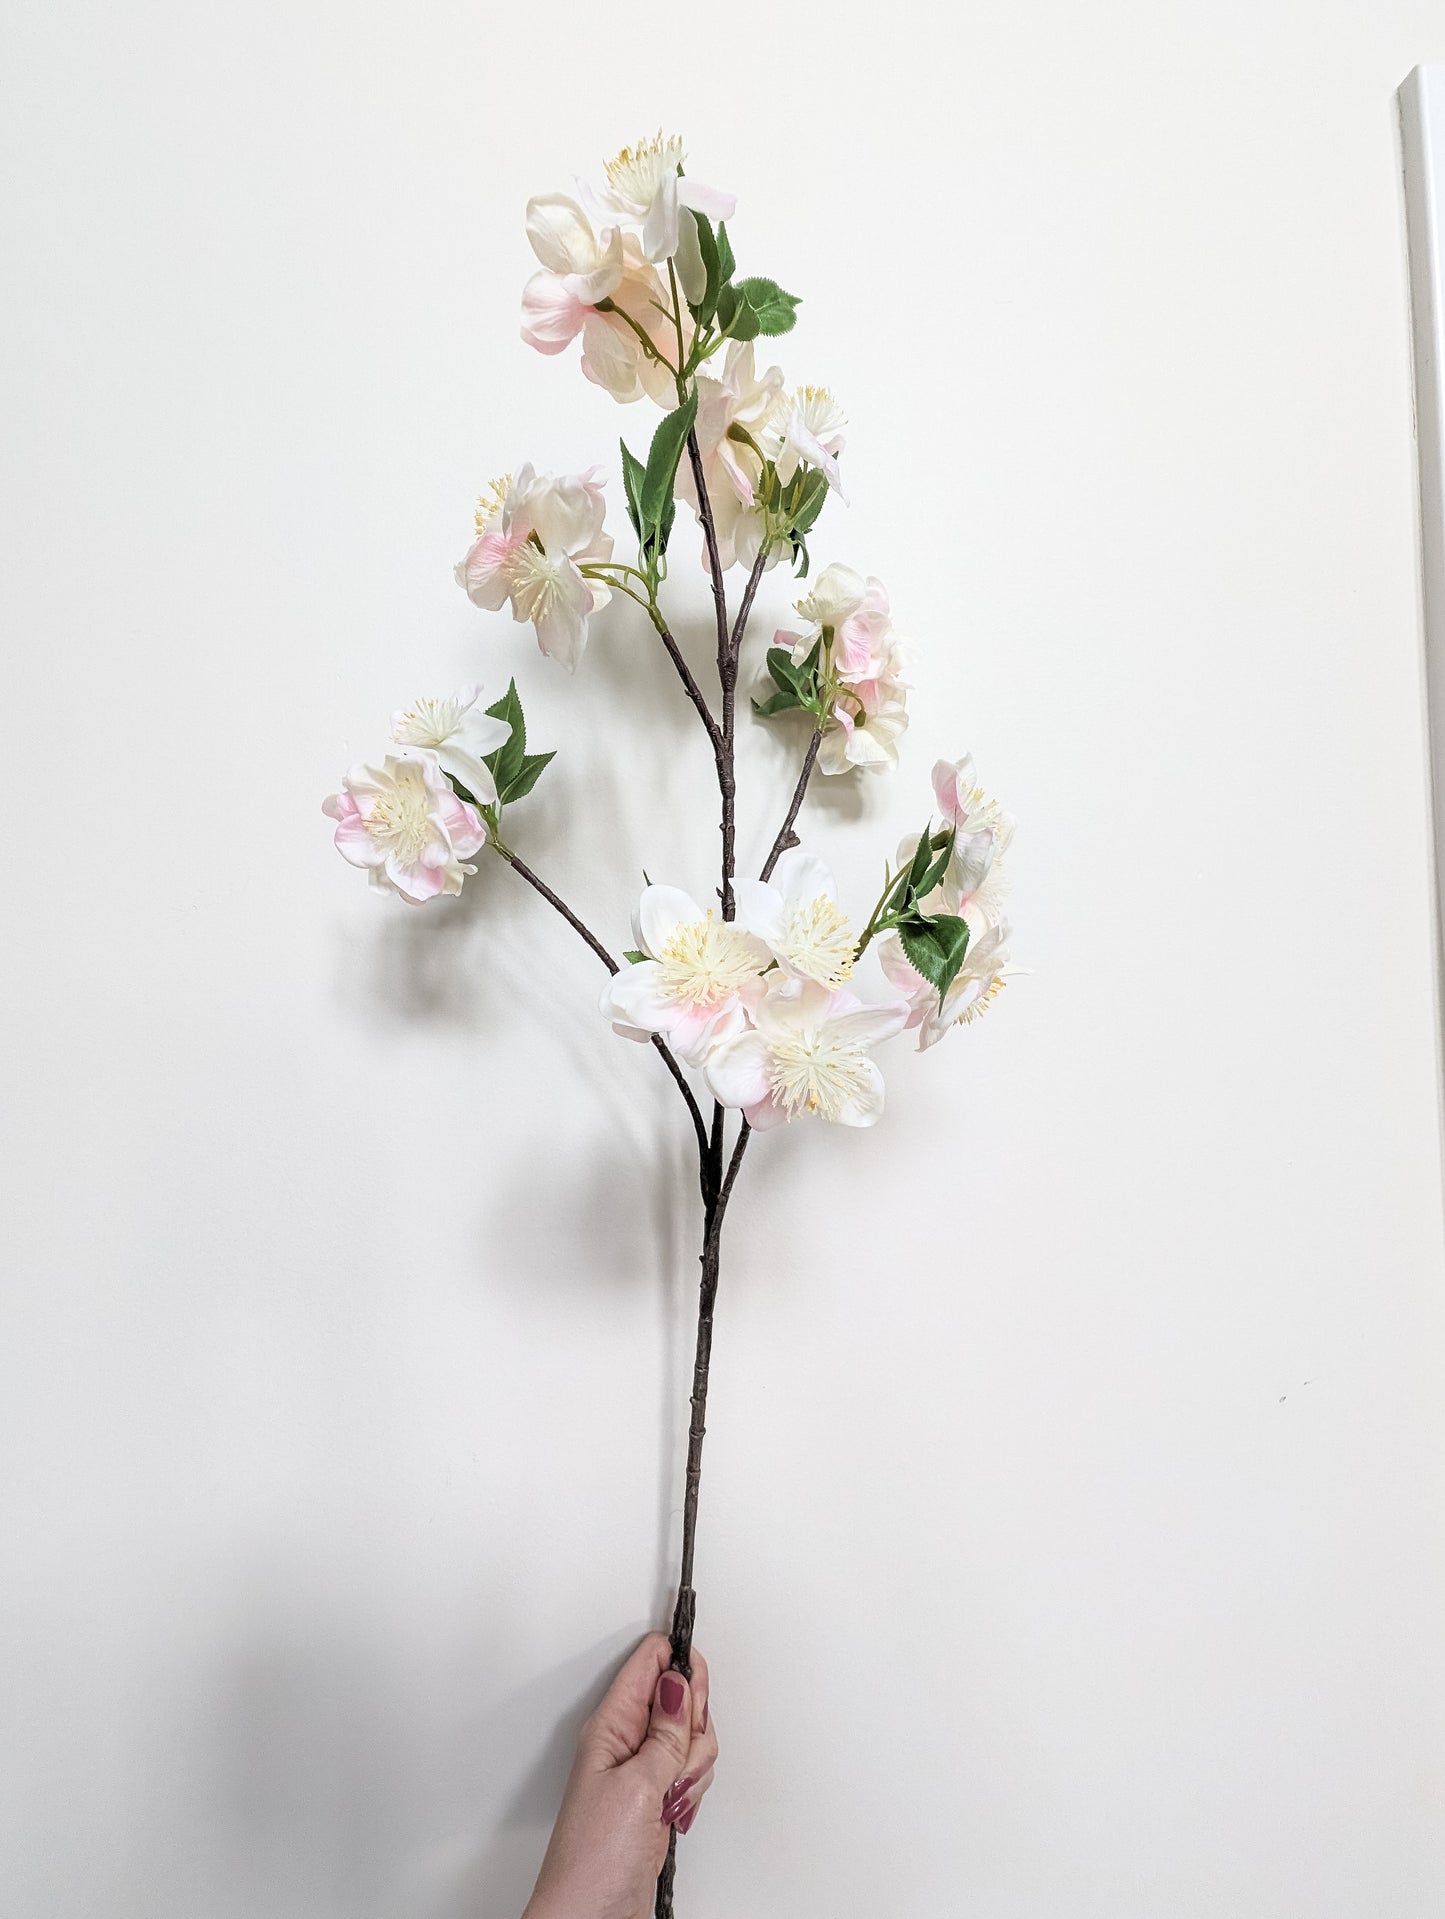 Life-like artificial cherry blossom stem with real touch petals with gradient of pink and white petals against white background. 